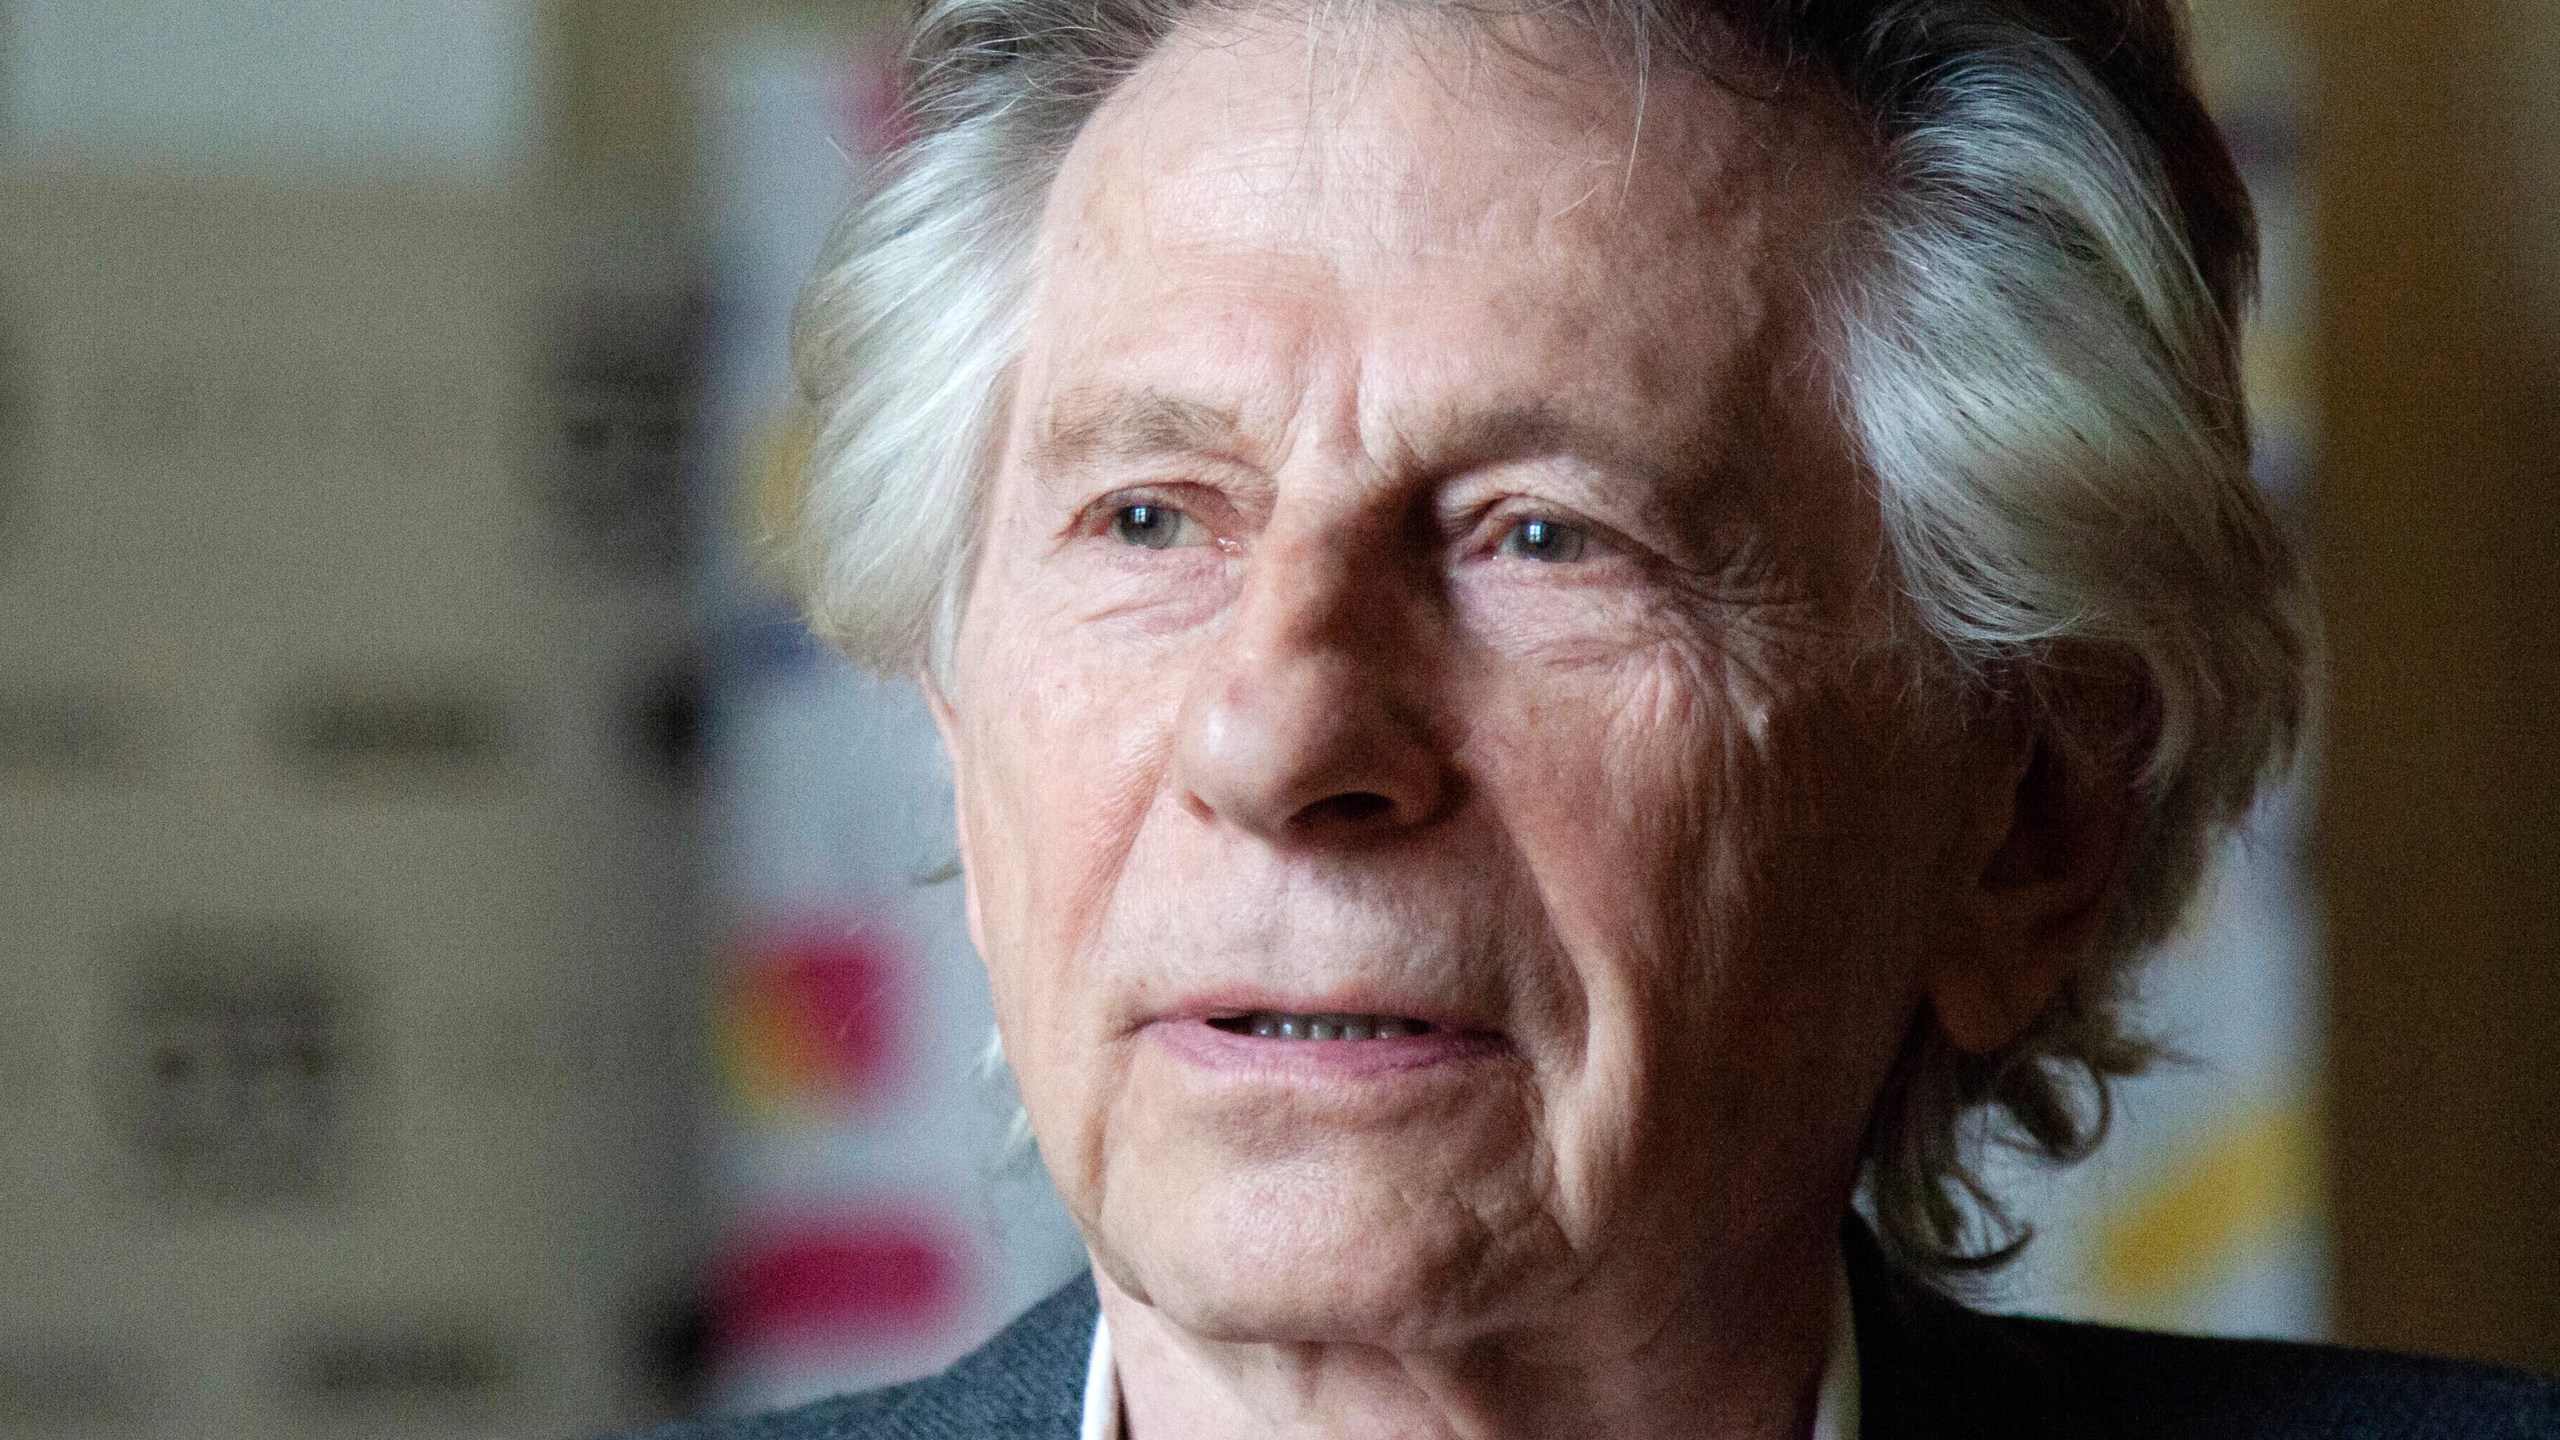 FILE - Director Roman Polanski appears at an international film festival, where he promoted his film, "Based on a True Story," in Krakow, Poland, on May 2, 2018. A woman has sued director Polanski, alleging he raped her in his home when she was a minor in 1973. The woman aired the allegations, which the 90-year-old Polanski has denied, in a news conference with her attorney, Gloria Allred, on Tuesday, March 12, 2024. (AP Photo, File)